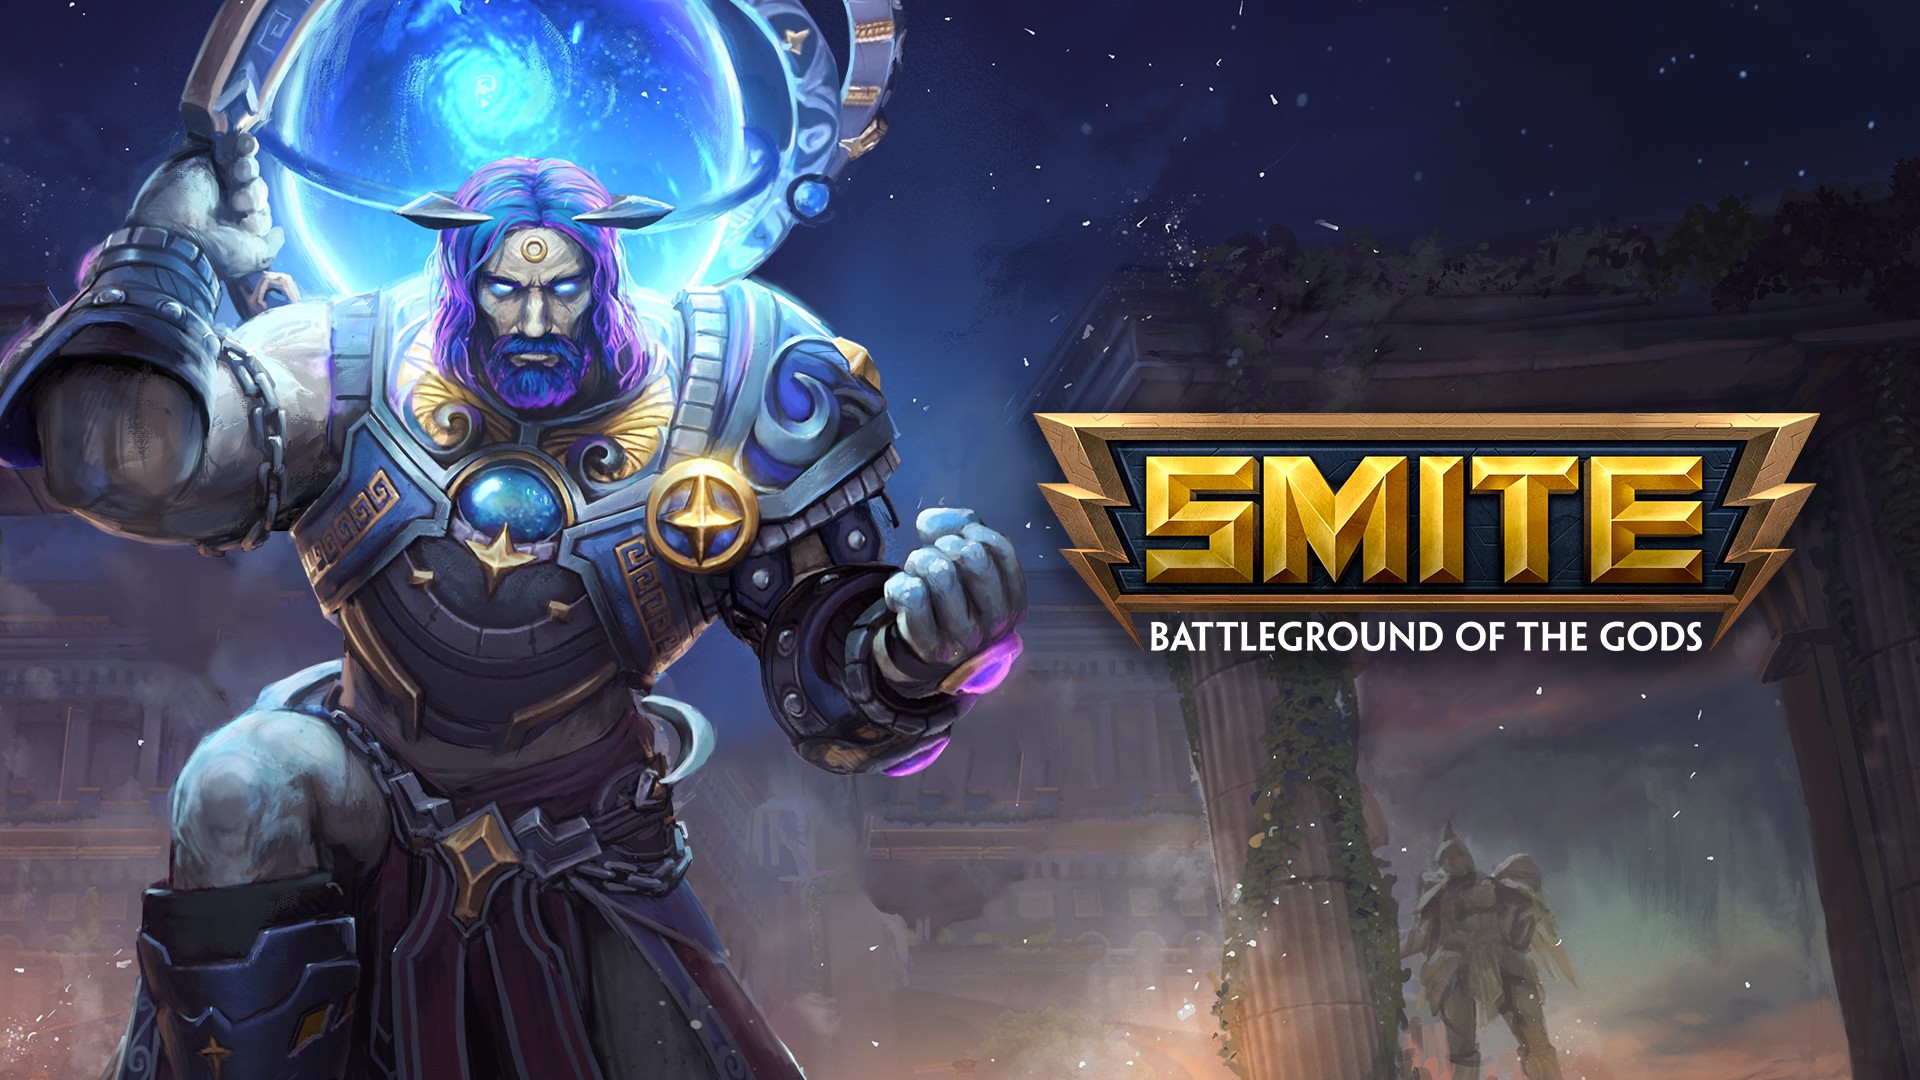 Video For Atlas, Titan of the Cosmos, is Available Now in Earth-moving Smite Update